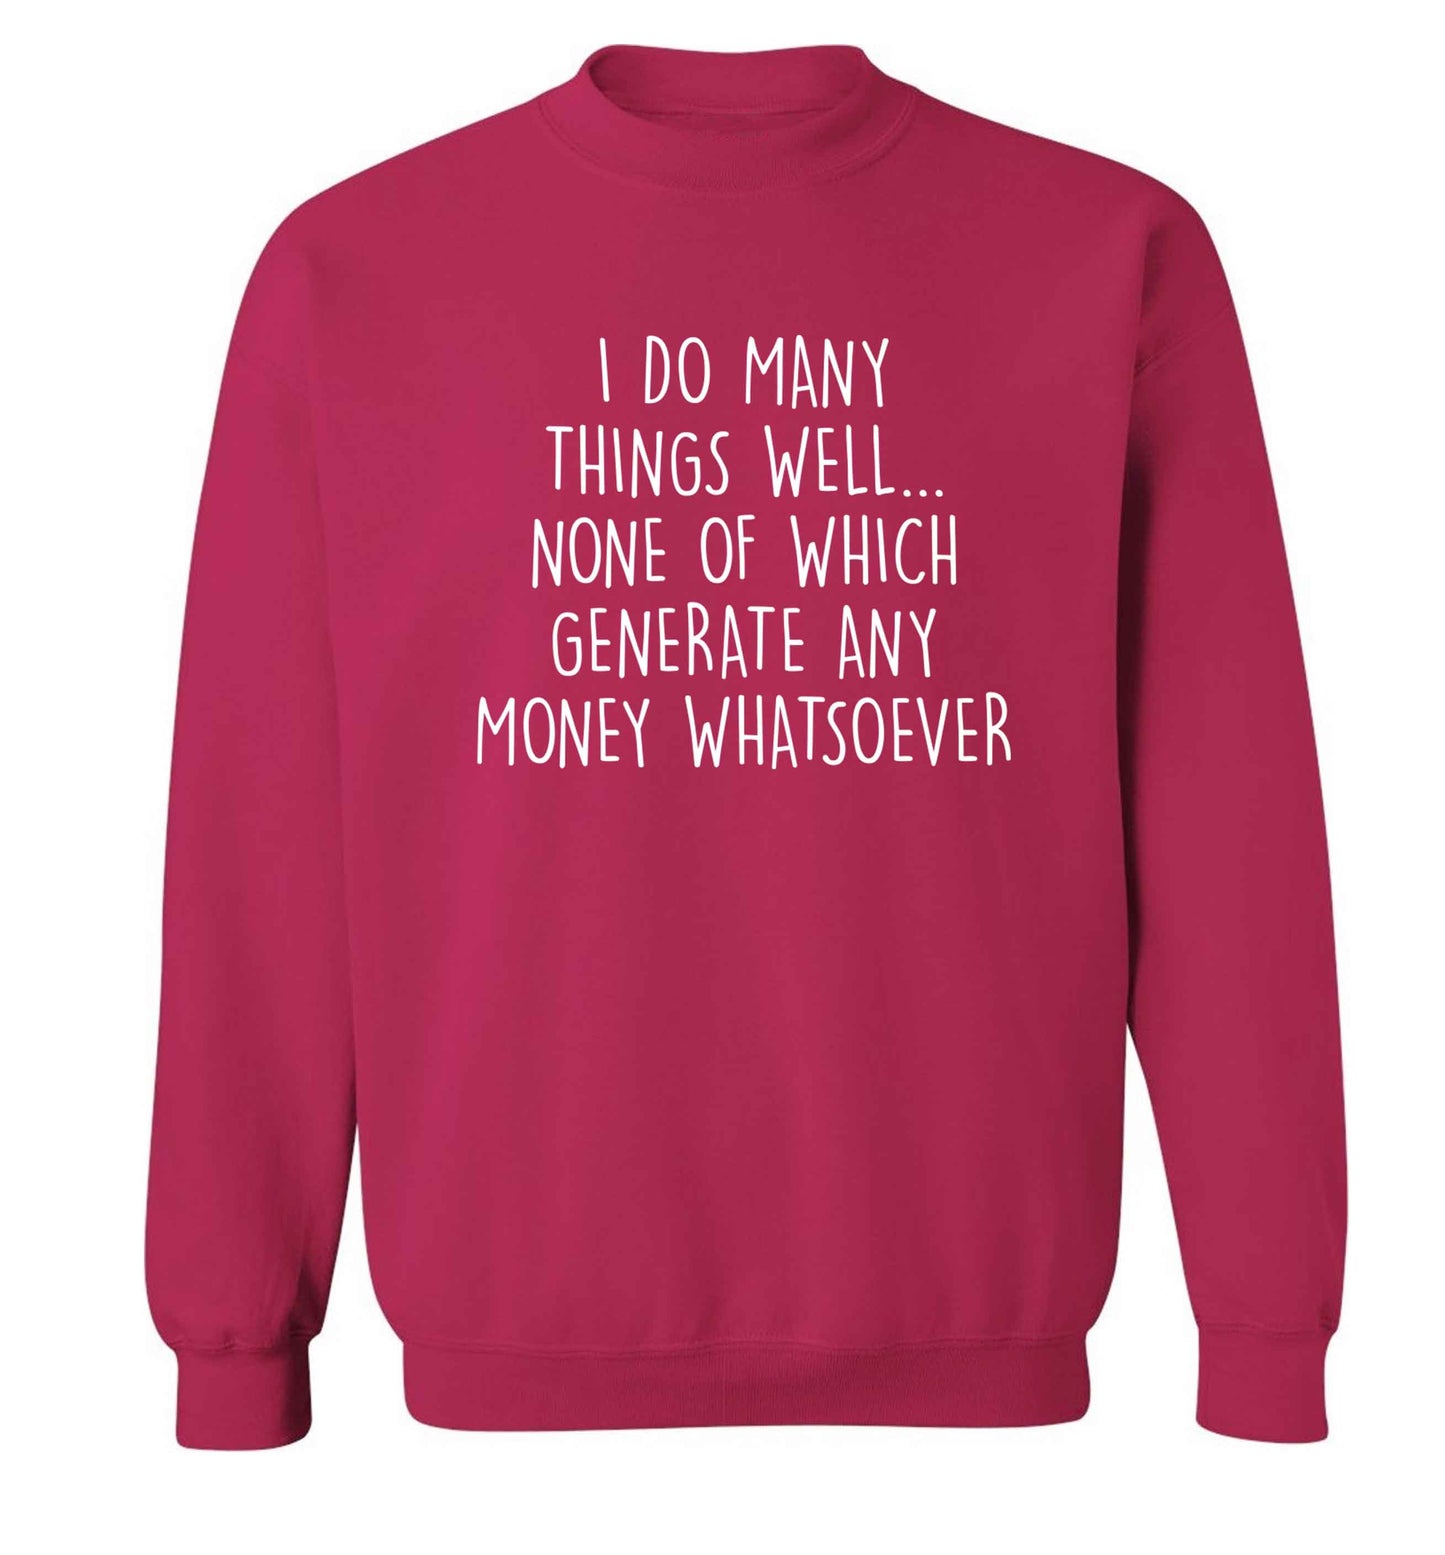 I do many things well none of which generate income Adult's unisex pink Sweater 2XL